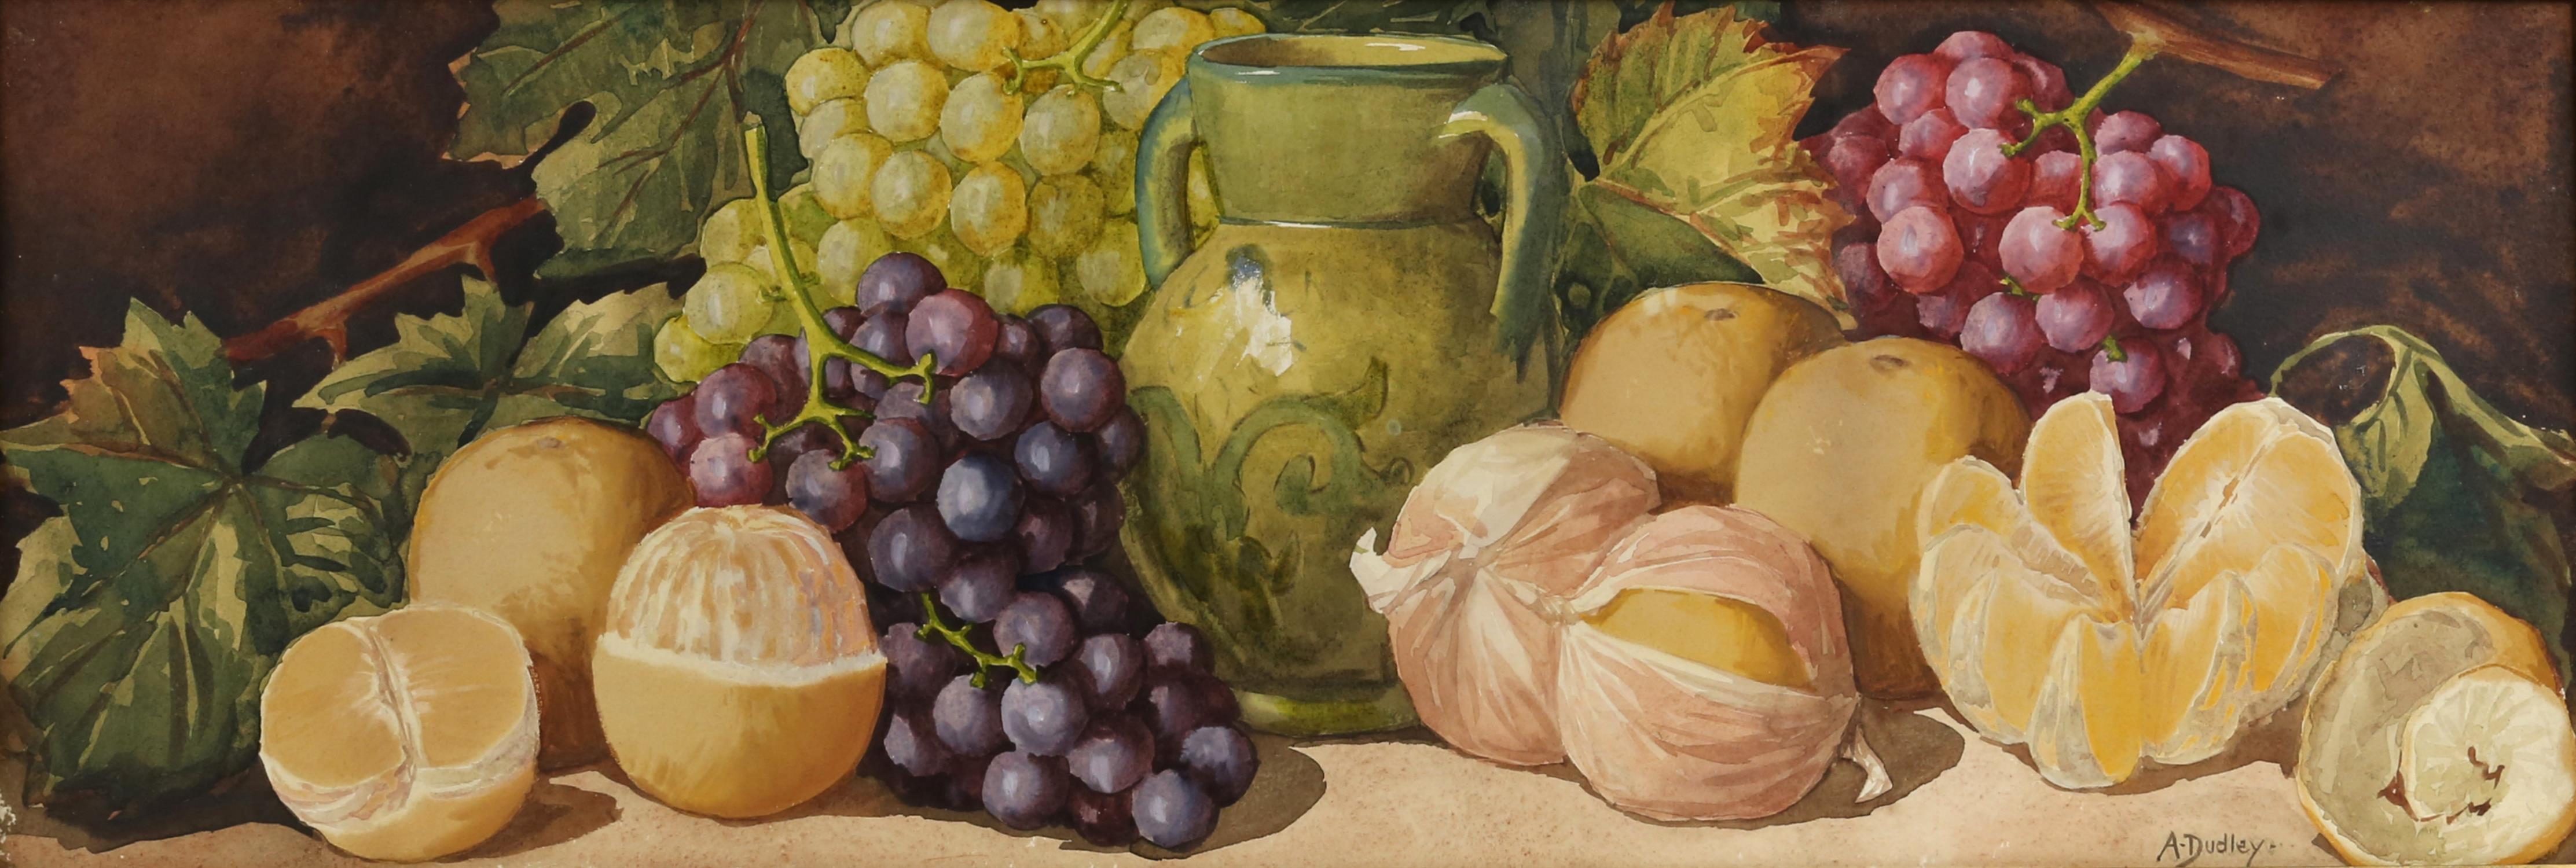 Arthur Dudley (aka Giovanni Barbaro, active 1890-1907) Still life of oranges, grapes and a vase; - Image 2 of 8